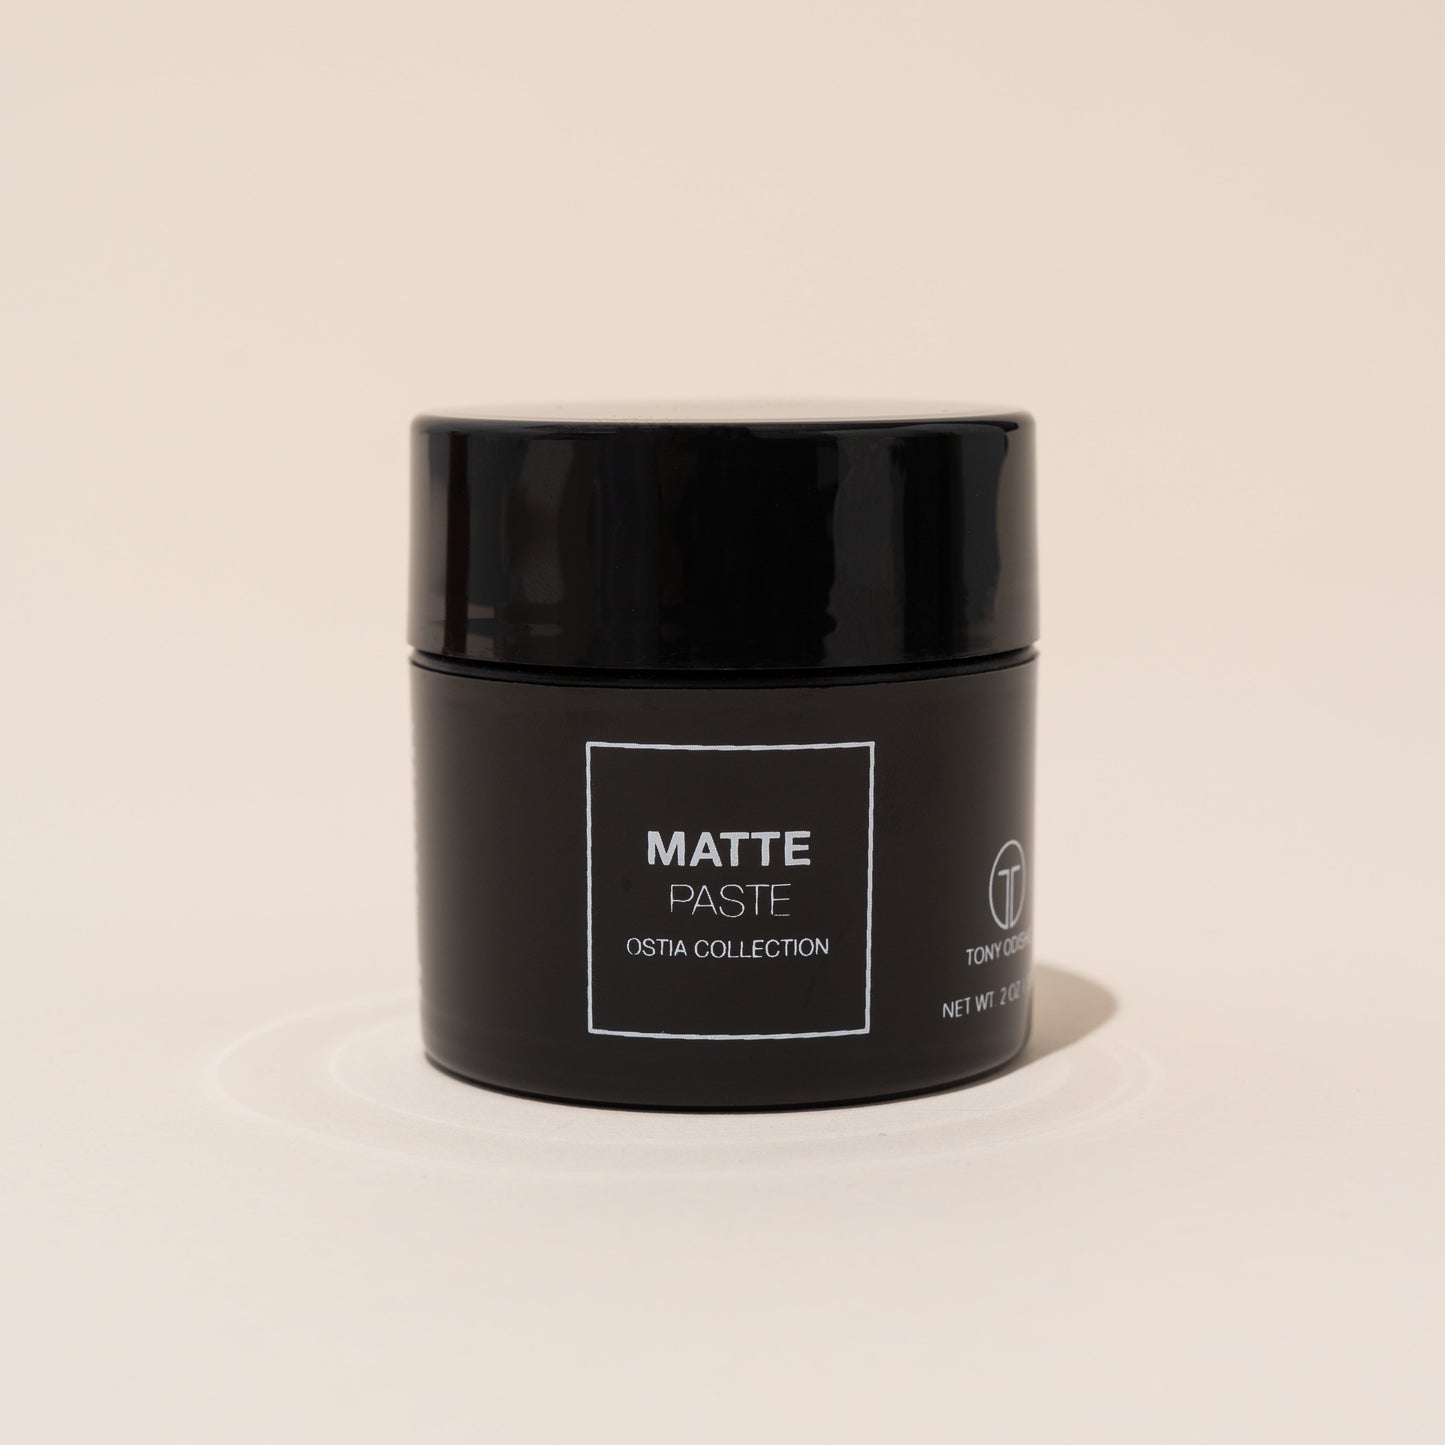 Ostia Collection Matte Paste 2oz Styling Aids Liquid Technology Hair Styling Product